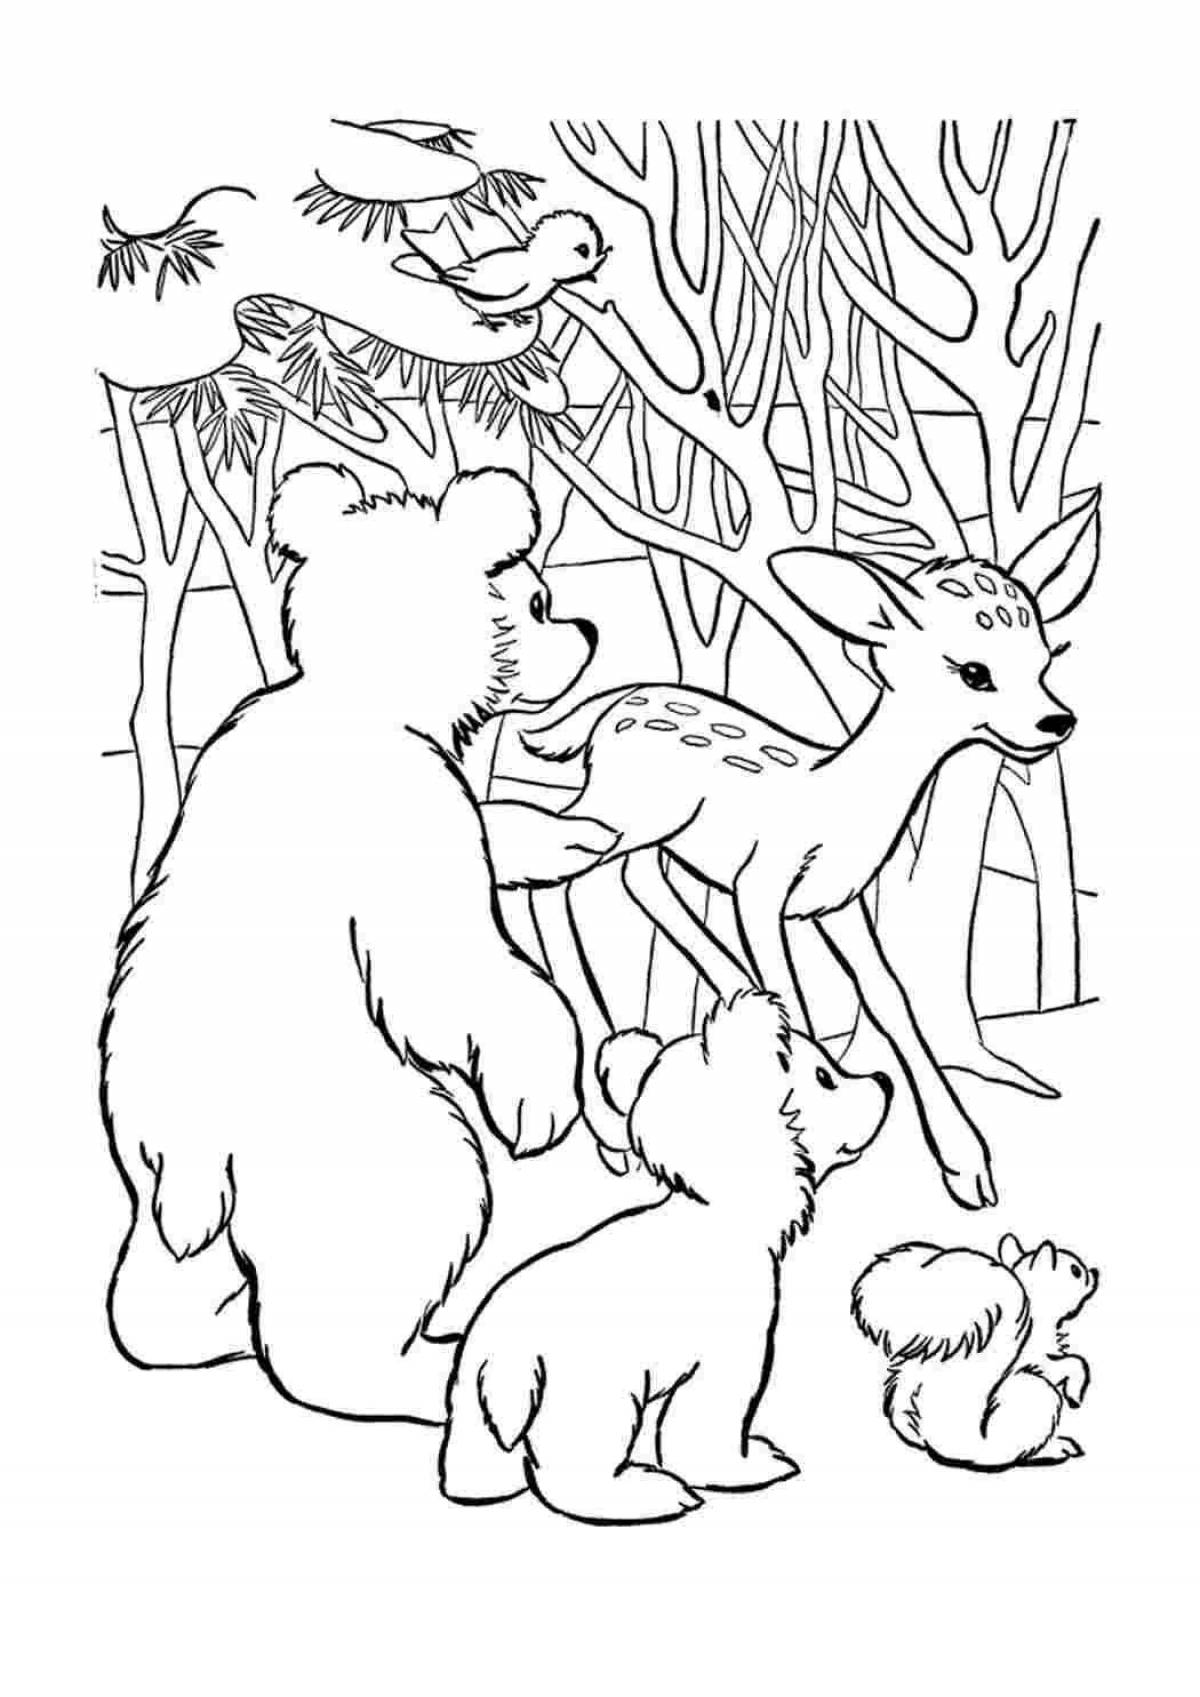 Cute forest animals coloring book for kids